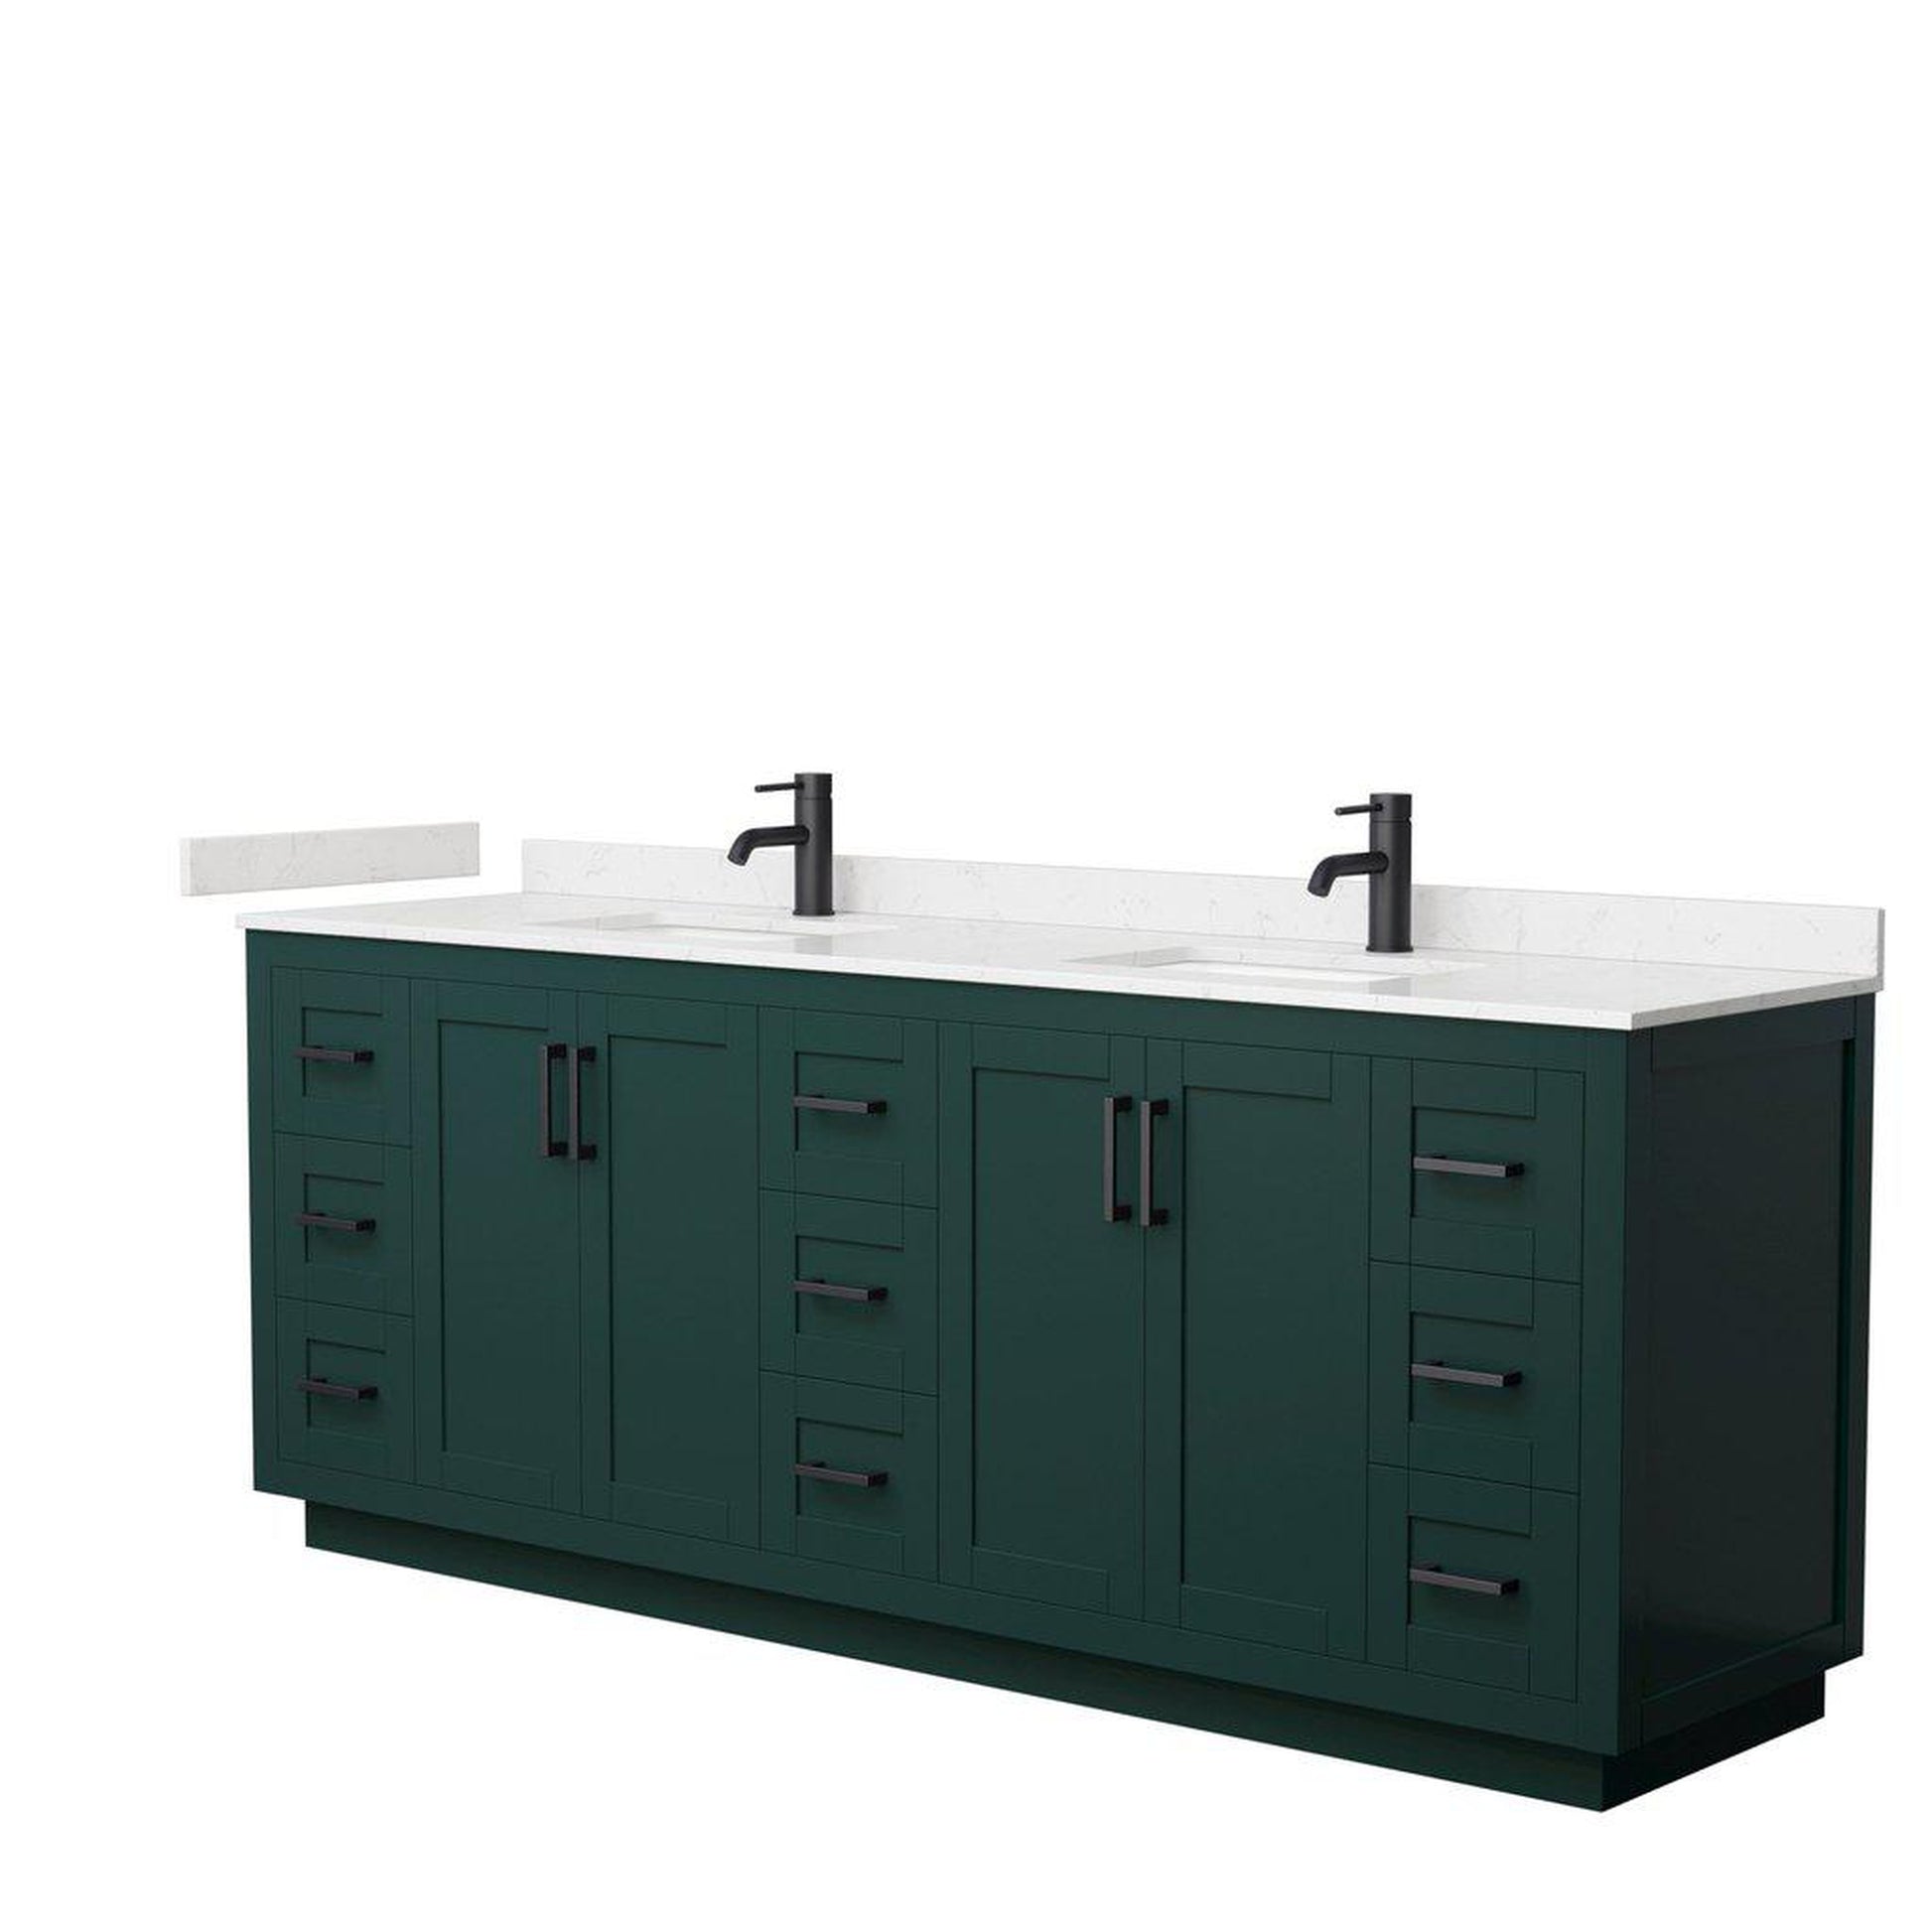 Wyndham Collection Miranda 84" Double Bathroom Green Vanity Set With Light-Vein Carrara Cultured Marble Countertop, Undermount Square Sink, And Matte Black Trim